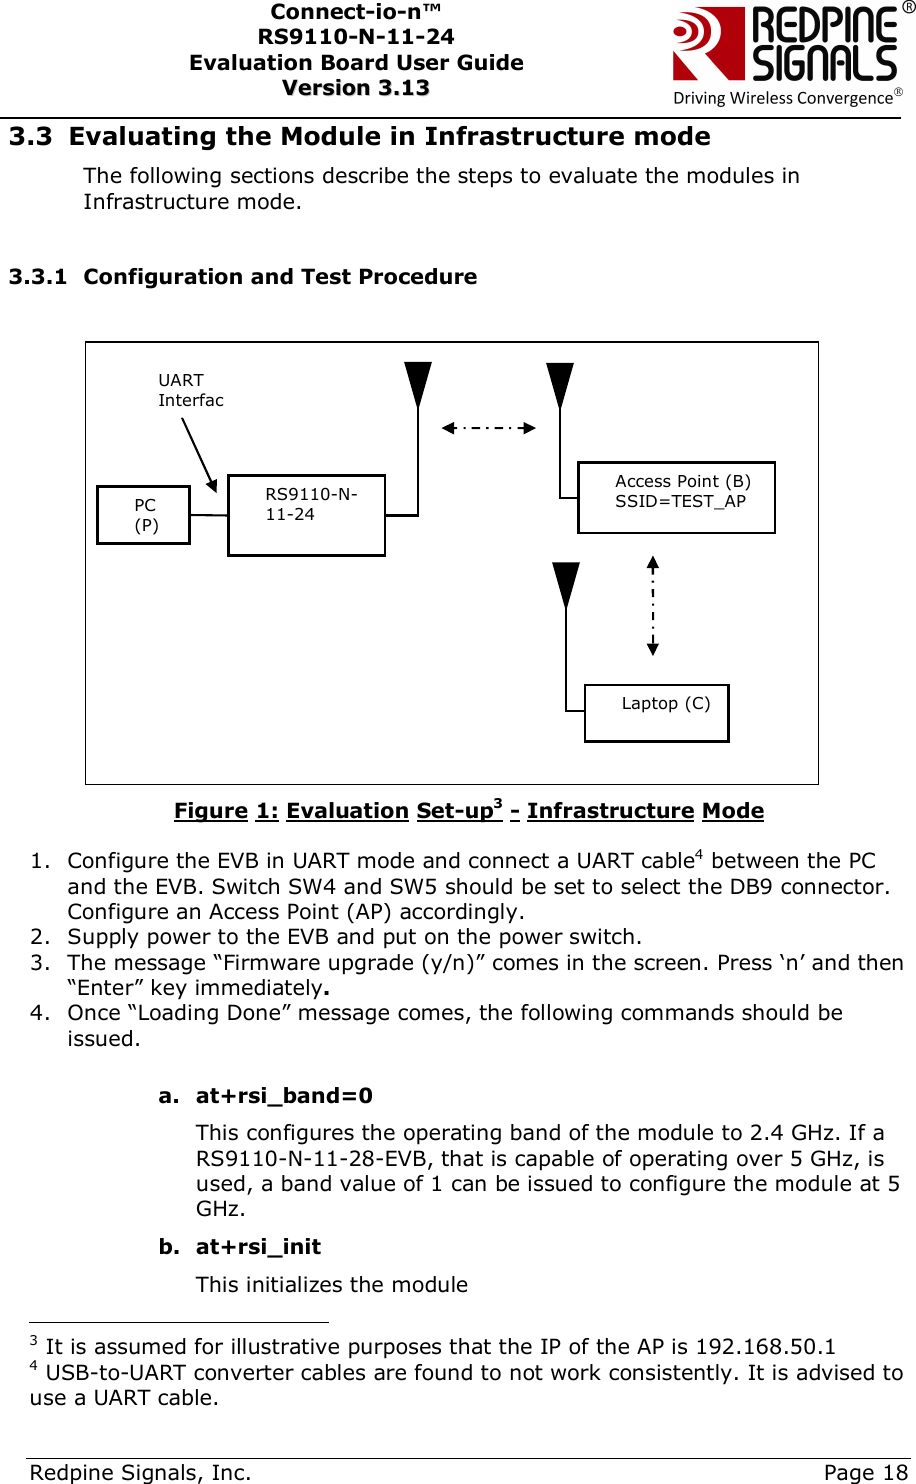      Redpine Signals, Inc.     Page 18 Connect-io-n™ RS9110-N-11-24  Evaluation Board User Guide  VVeerrssiioonn  33..1133    3.3 Evaluating the Module in Infrastructure mode  The following sections describe the steps to evaluate the modules in Infrastructure mode.  3.3.1 Configuration and Test Procedure   Figure 1: Evaluation Set-up3 - Infrastructure Mode  1. Configure the EVB in UART mode and connect a UART cable4 between the PC and the EVB. Switch SW4 and SW5 should be set to select the DB9 connector. Configure an Access Point (AP) accordingly. 2. Supply power to the EVB and put on the power switch.  3. The message “Firmware upgrade (y/n)” comes in the screen. Press ‘n’ and then “Enter” key immediately. 4. Once “Loading Done” message comes, the following commands should be issued.  a. at+rsi_band=0   This configures the operating band of the module to 2.4 GHz. If a RS9110-N-11-28-EVB, that is capable of operating over 5 GHz, is used, a band value of 1 can be issued to configure the module at 5 GHz. b. at+rsi_init  This initializes the module                                           3 It is assumed for illustrative purposes that the IP of the AP is 192.168.50.1 4 USB-to-UART converter cables are found to not work consistently. It is advised to use a UART cable. PC (P) RS9110-N-11-24 UART InterfacAccess Point (B) SSID=TEST_AP Laptop (C) 